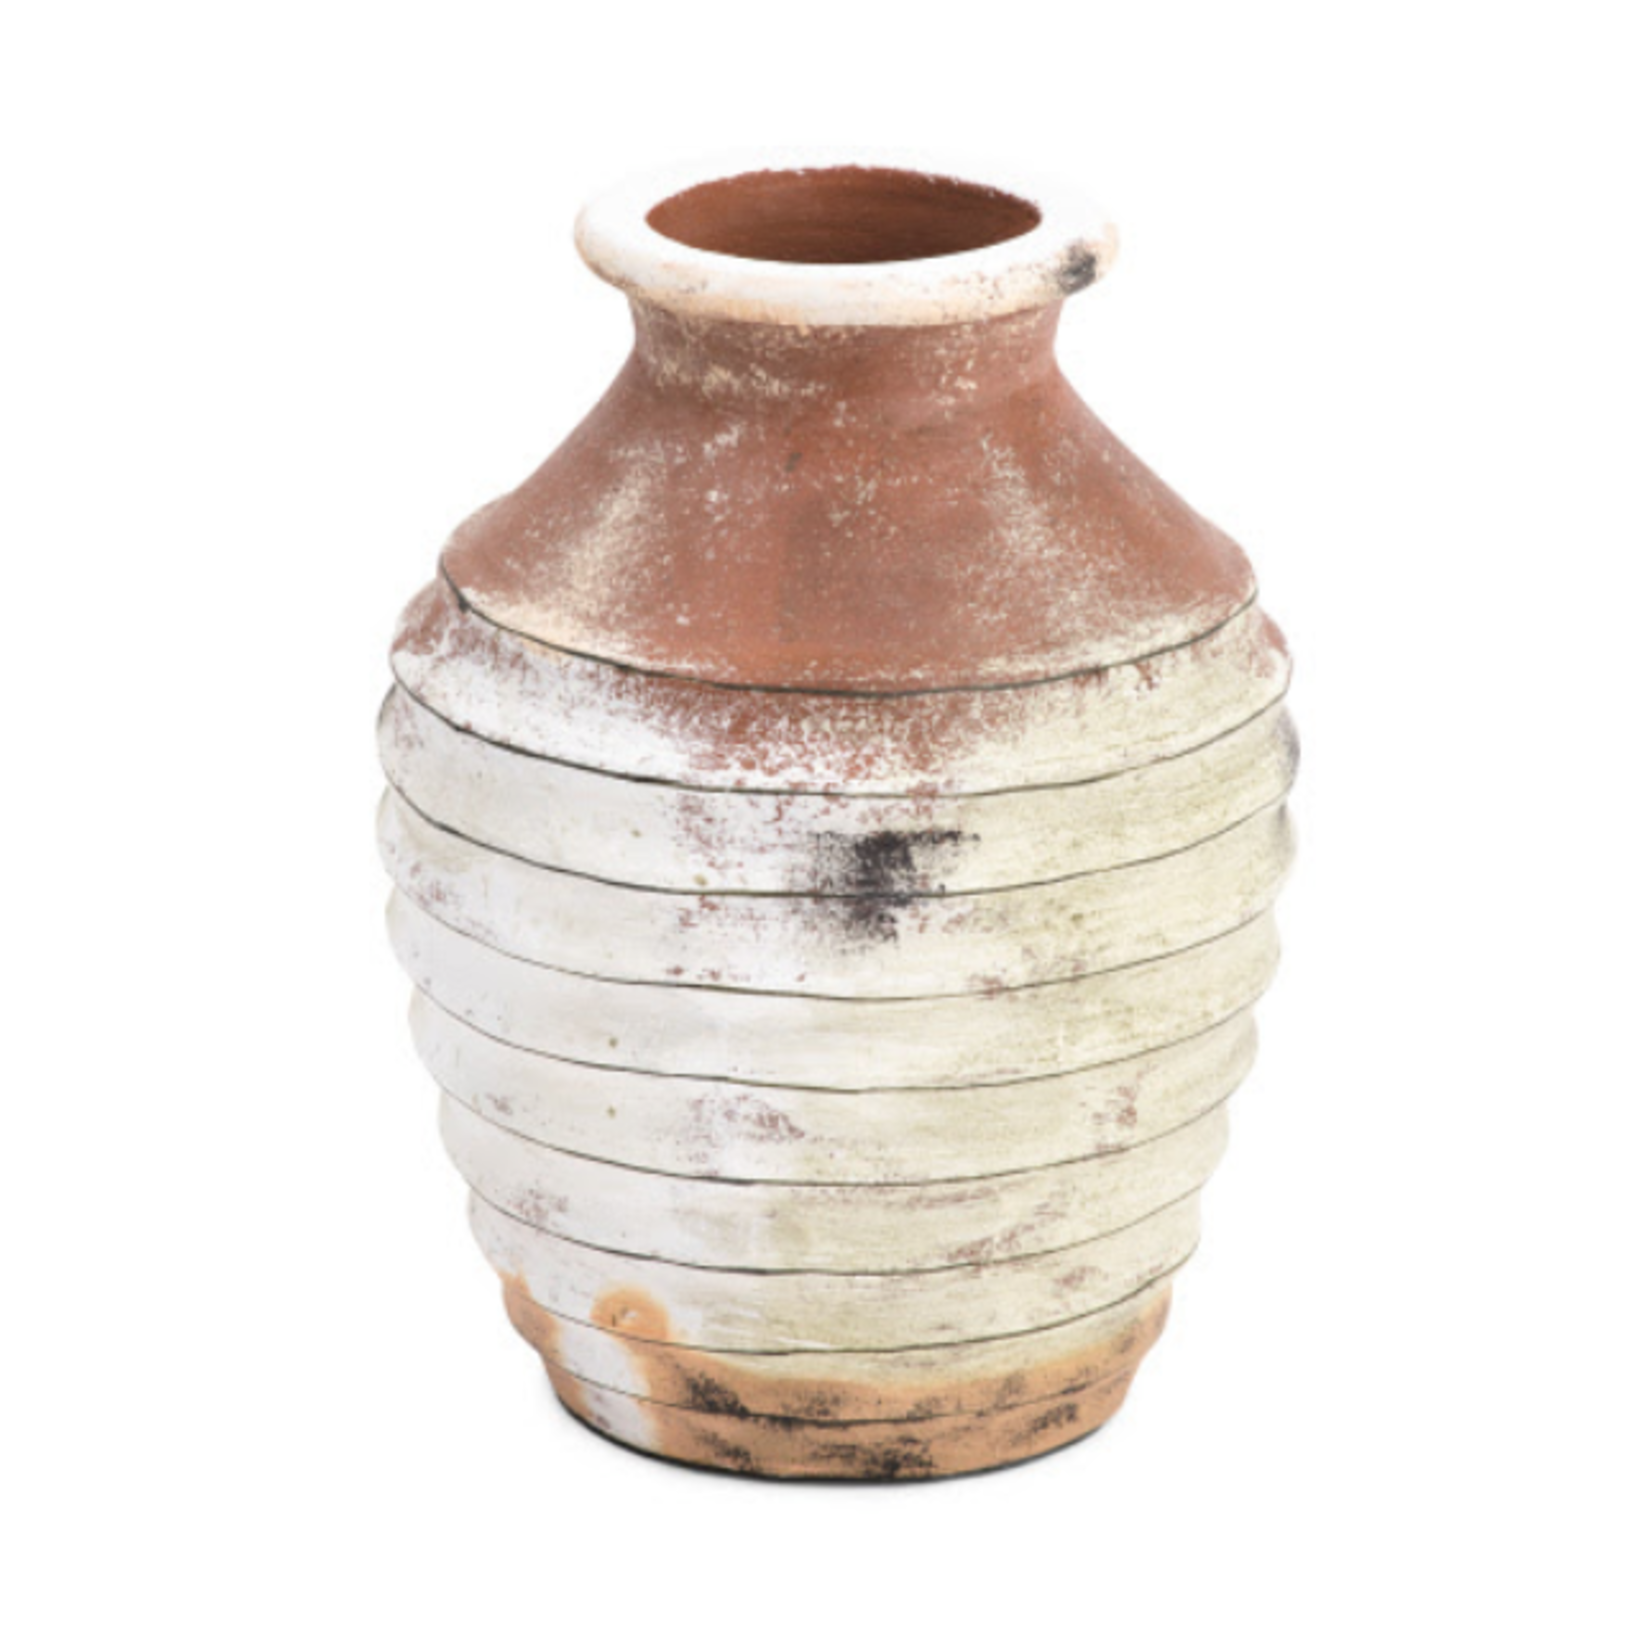 TERRACOTA CONTAINER- NO WATER!! REG $29.99